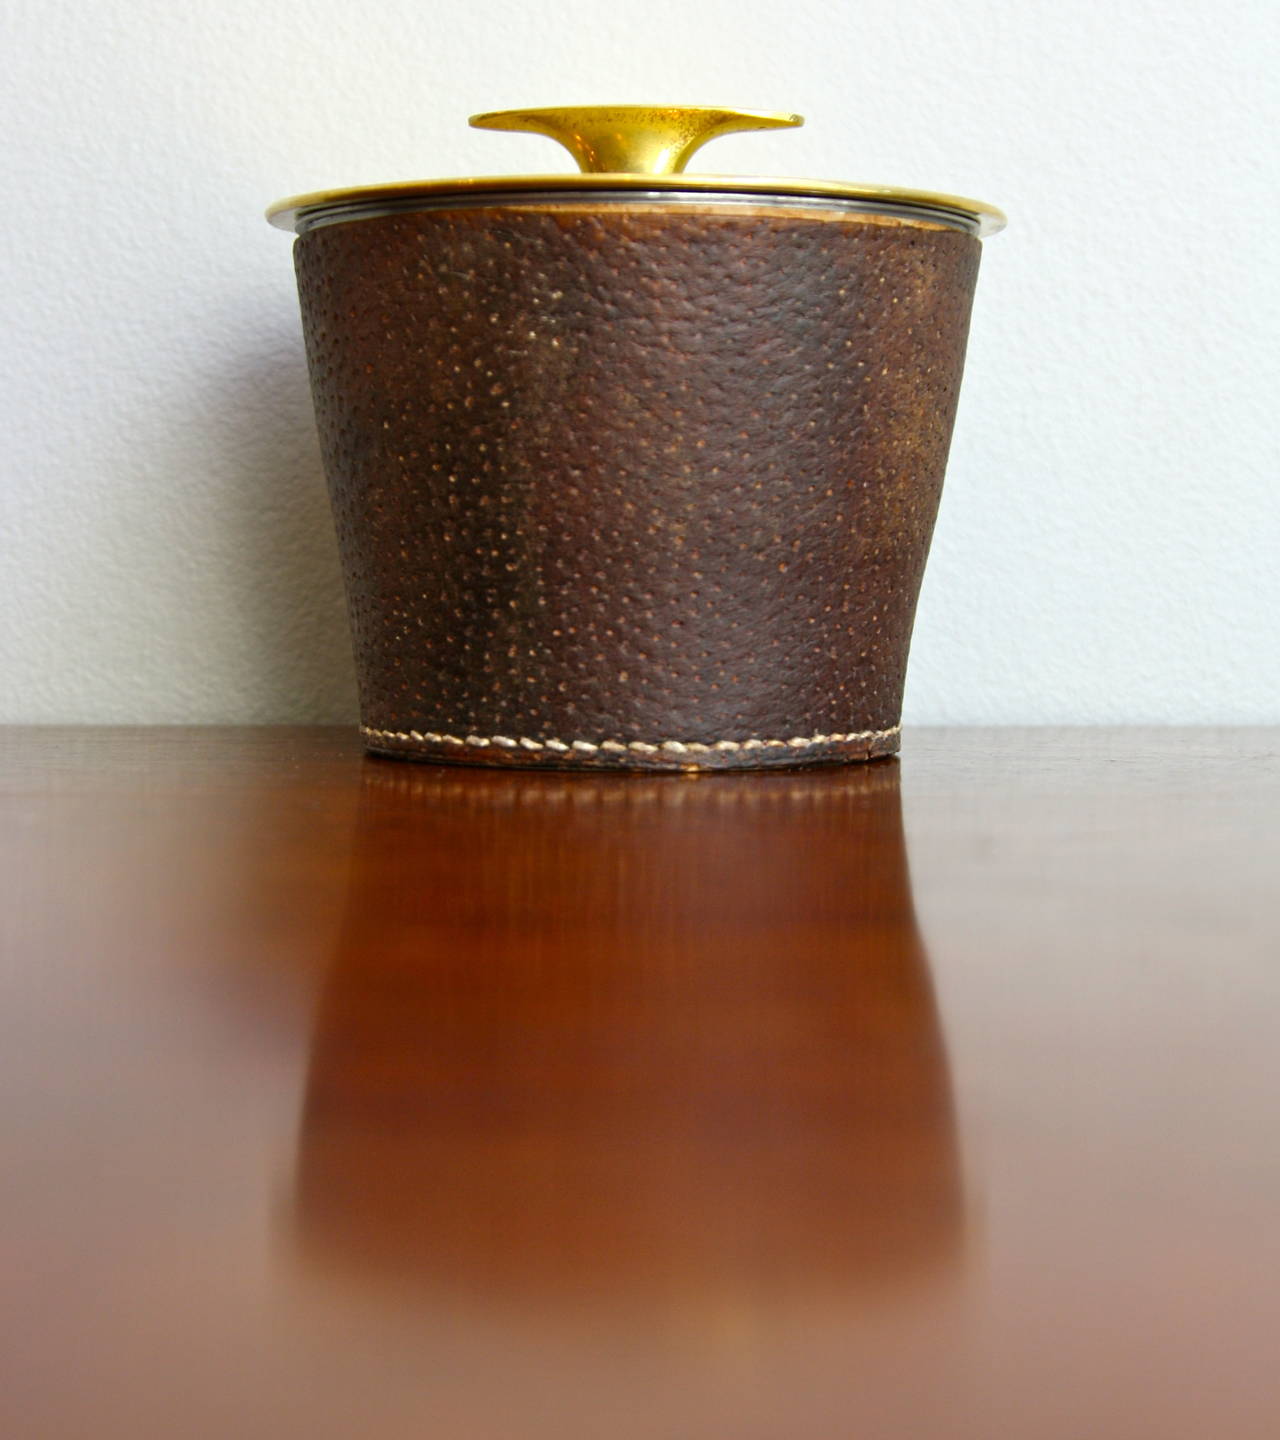 A Wonderful Leather covered tobacco jar by the brass master Carl Auböck. 
A  strong quality piece demonstrating the skill of the small workshop based in Vienna. Lovely brass detailing on the lid and hand stitching on leather base cover.